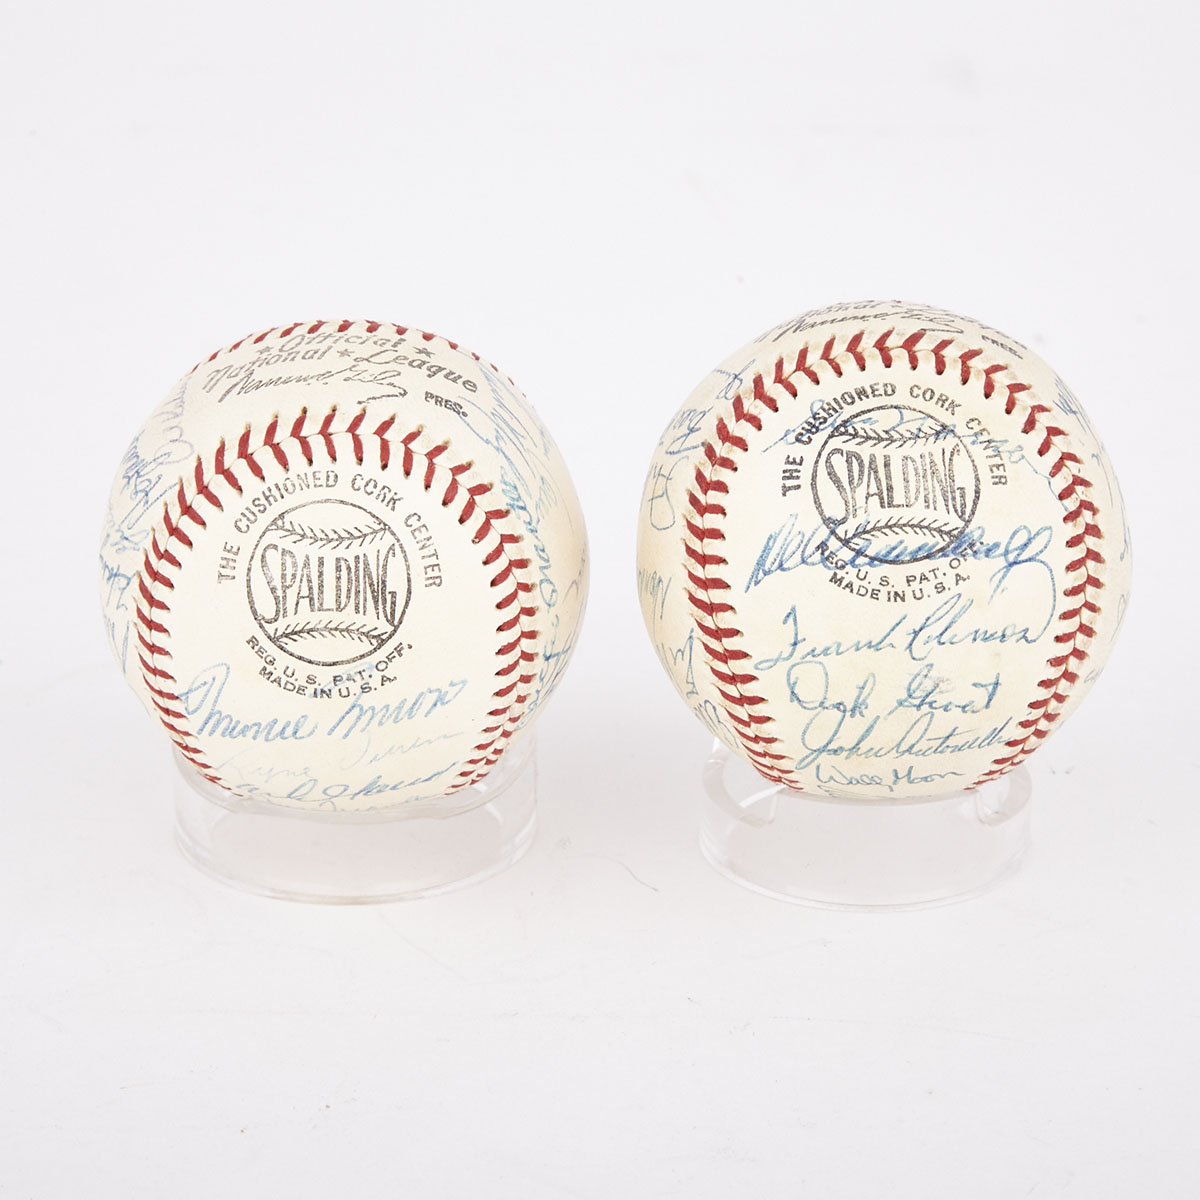 [Baseball] Two American and National League 1959 All Star Team Signed Baseballs